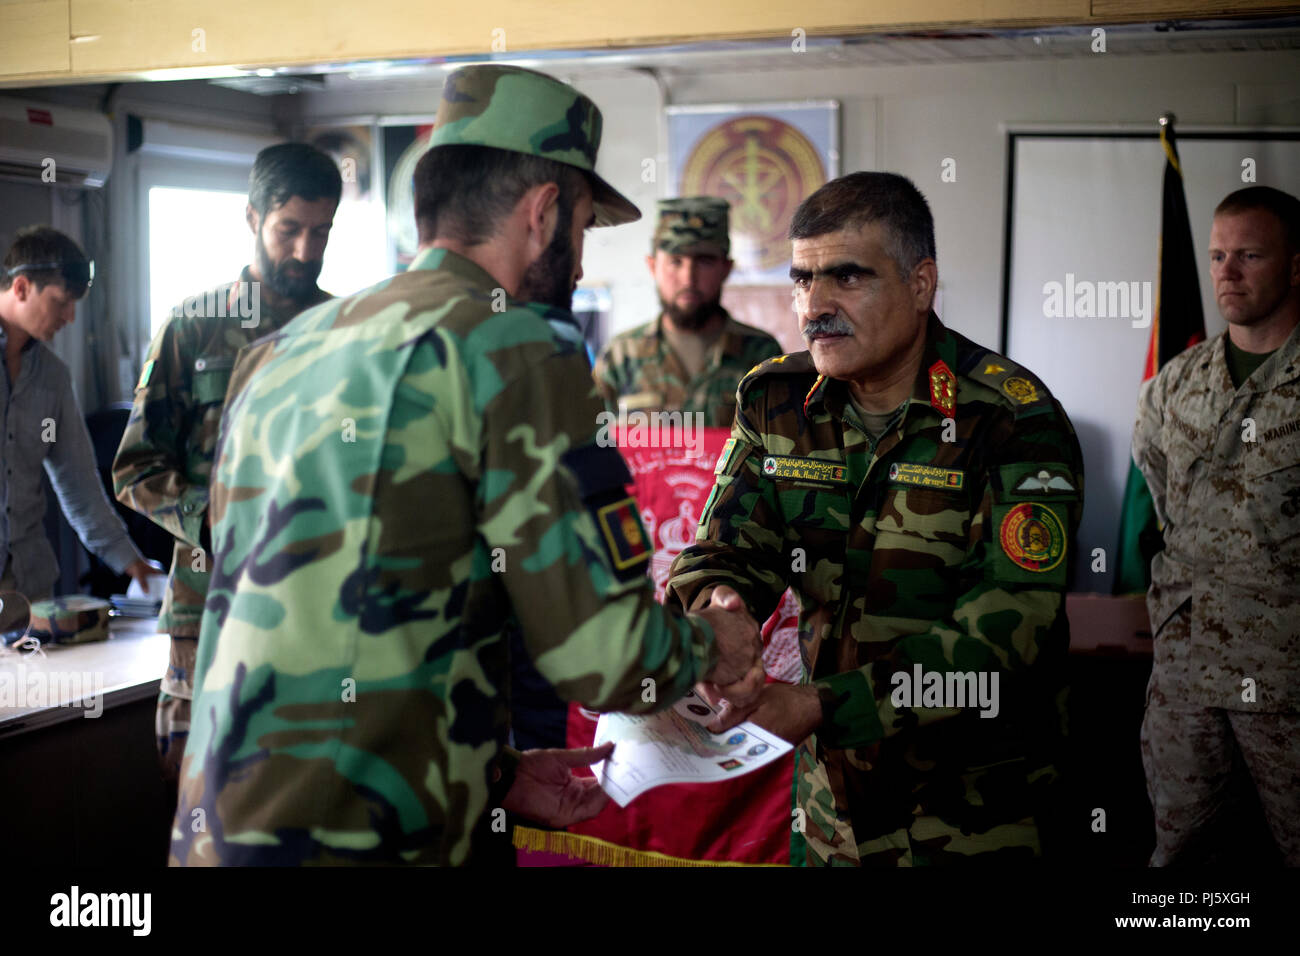 HELMAND PROVINCE, Afghanistan (August 26, 2018) – Afghan Brig. Gen. Abdul Hadi, Afghan National Army (ANA) 215th Corps deputy commander, hands an ANA soldier his certificate of completion during a graduation ceremony for a train-the-trainer course at the Regional Military Training Center on Camp Shorabak. The nearly month-long course taught instructors the basics of warrior training so they can, in turn, teach the upcoming classes of the new ANA Territorial Force who will assist in providing safe and secure elections to the people of Helmand and provinces this October. (U.S. Marine Corps photo Stock Photo